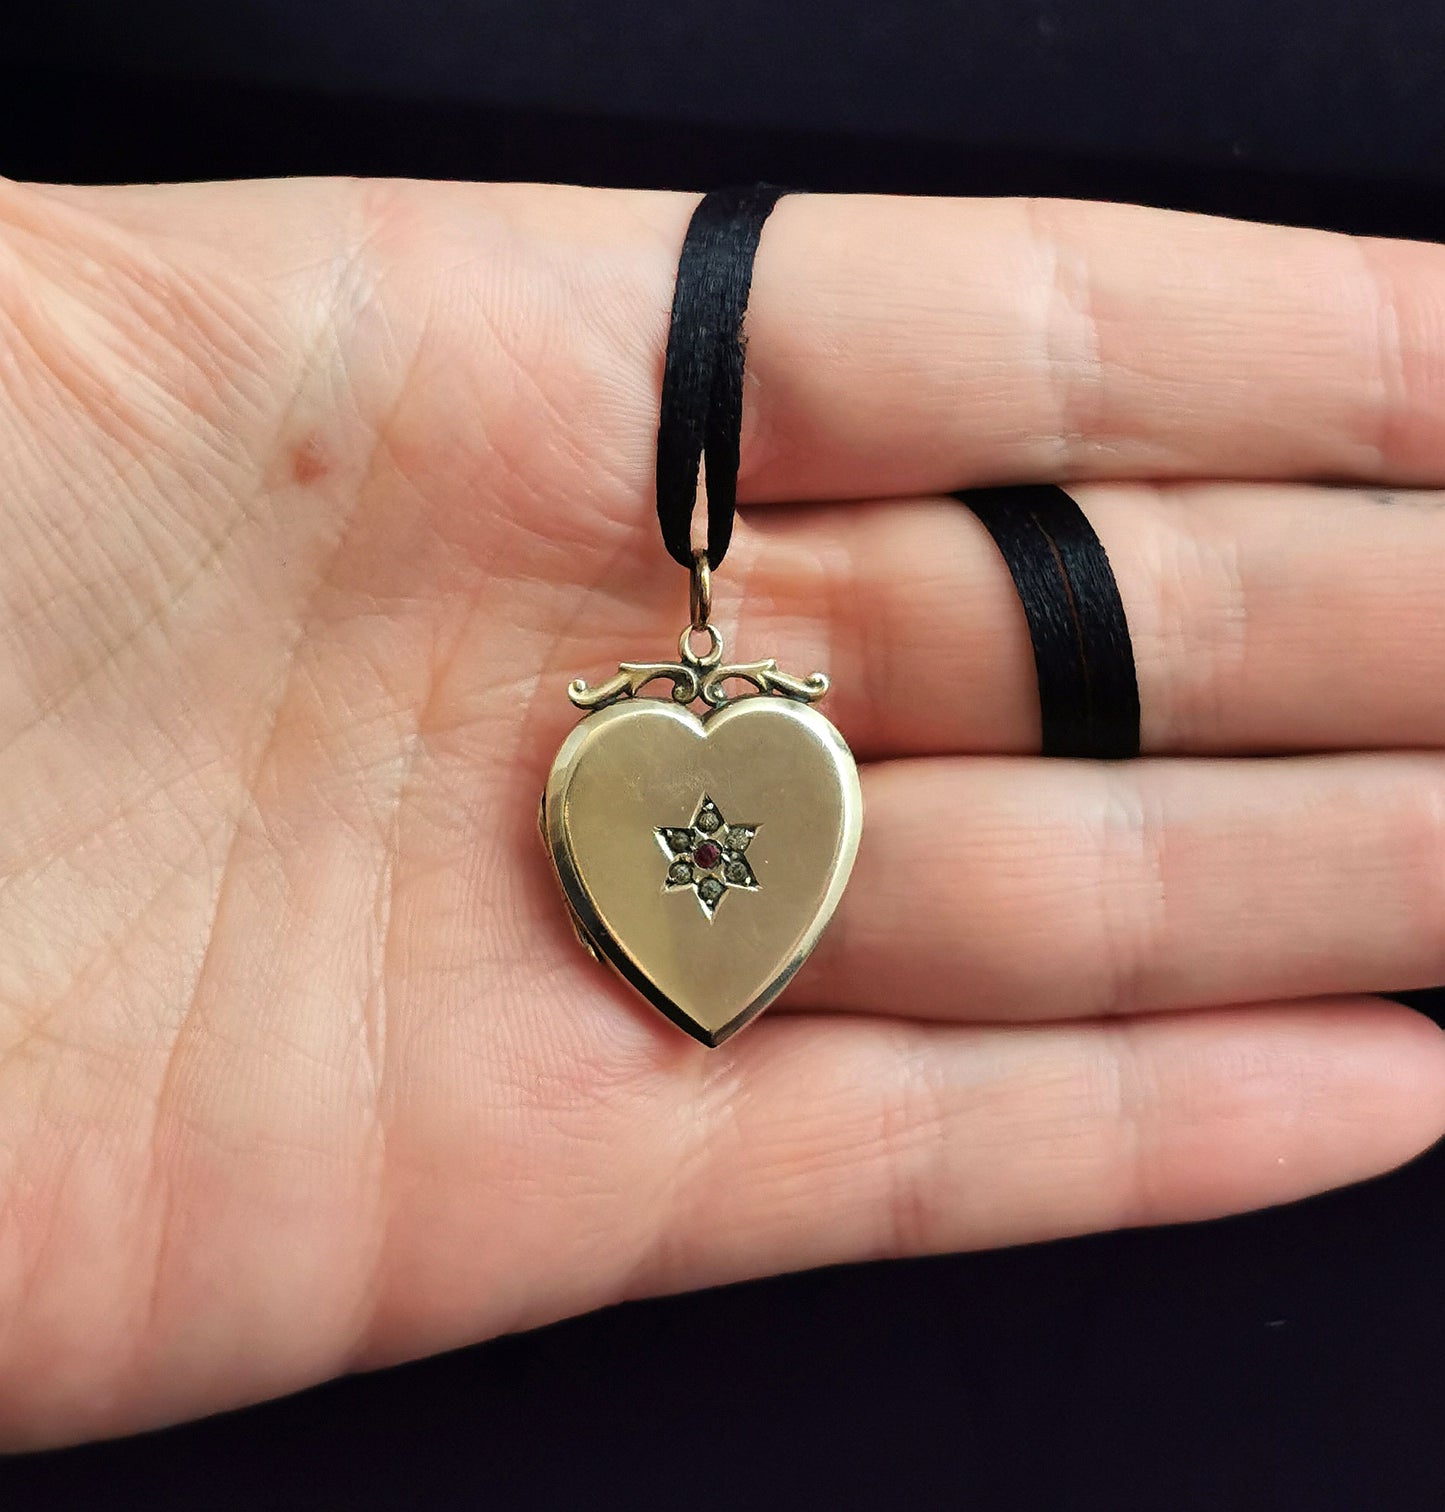 Antique heart shaped locket, 9ct gold front and back, paste star